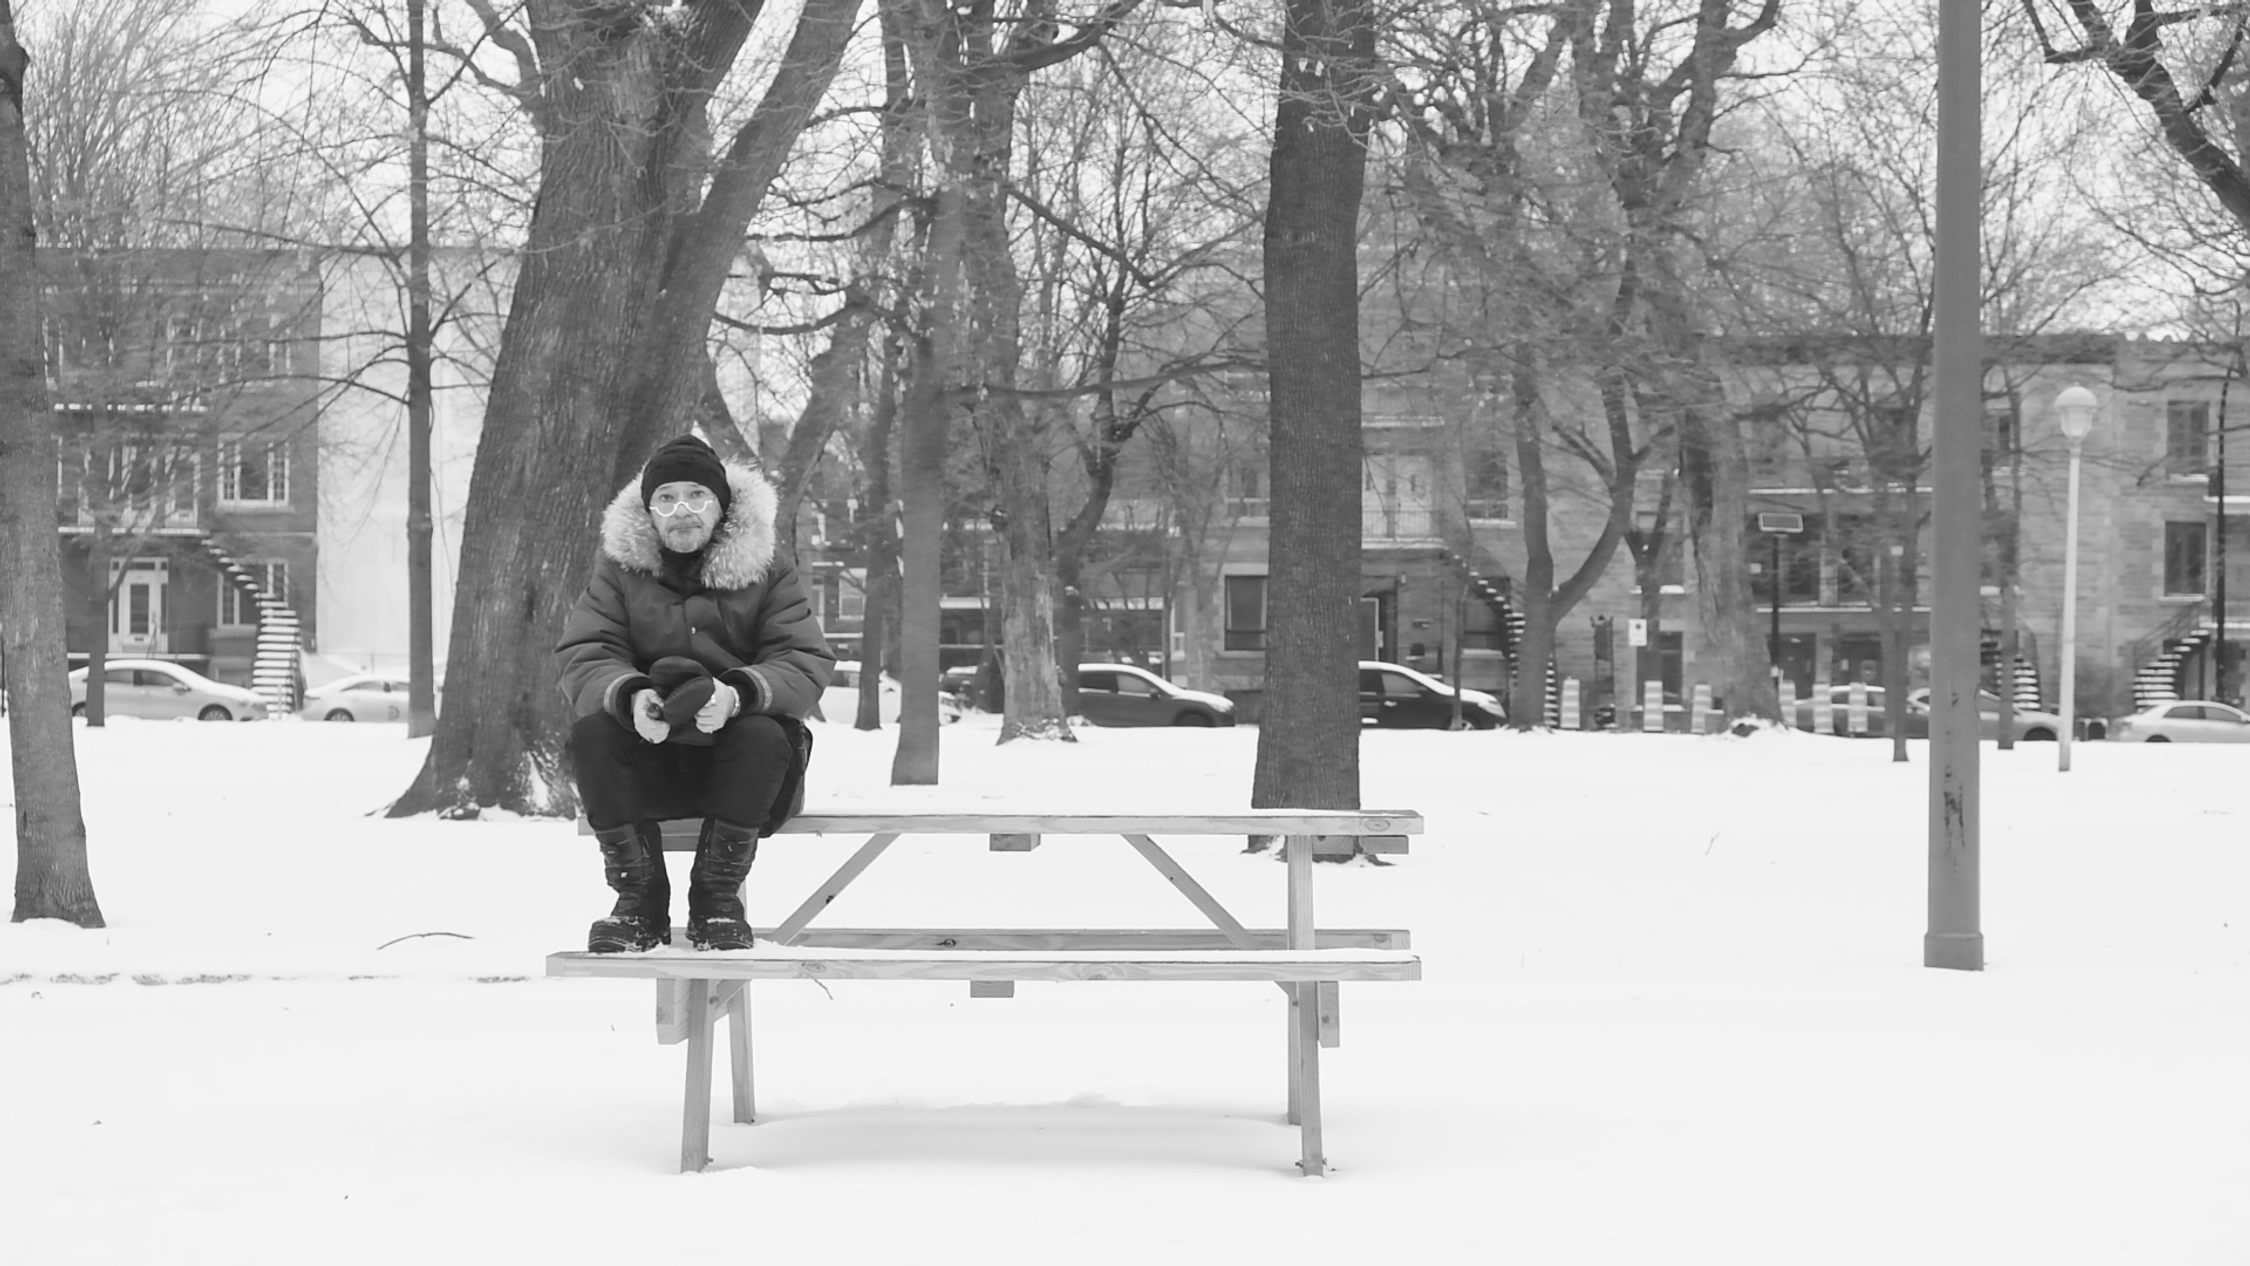 A black and white image of a snowy park setting, an individual is seated alone on a picnic table, dressed warmly in a heavy coat with a fur-lined hood, gloves, and a winter hat. The background features leafless trees, indicating it's a cold season, and buildings that suggest an urban environment. The person's posture and the empty park convey a sense of solitude or reflection.